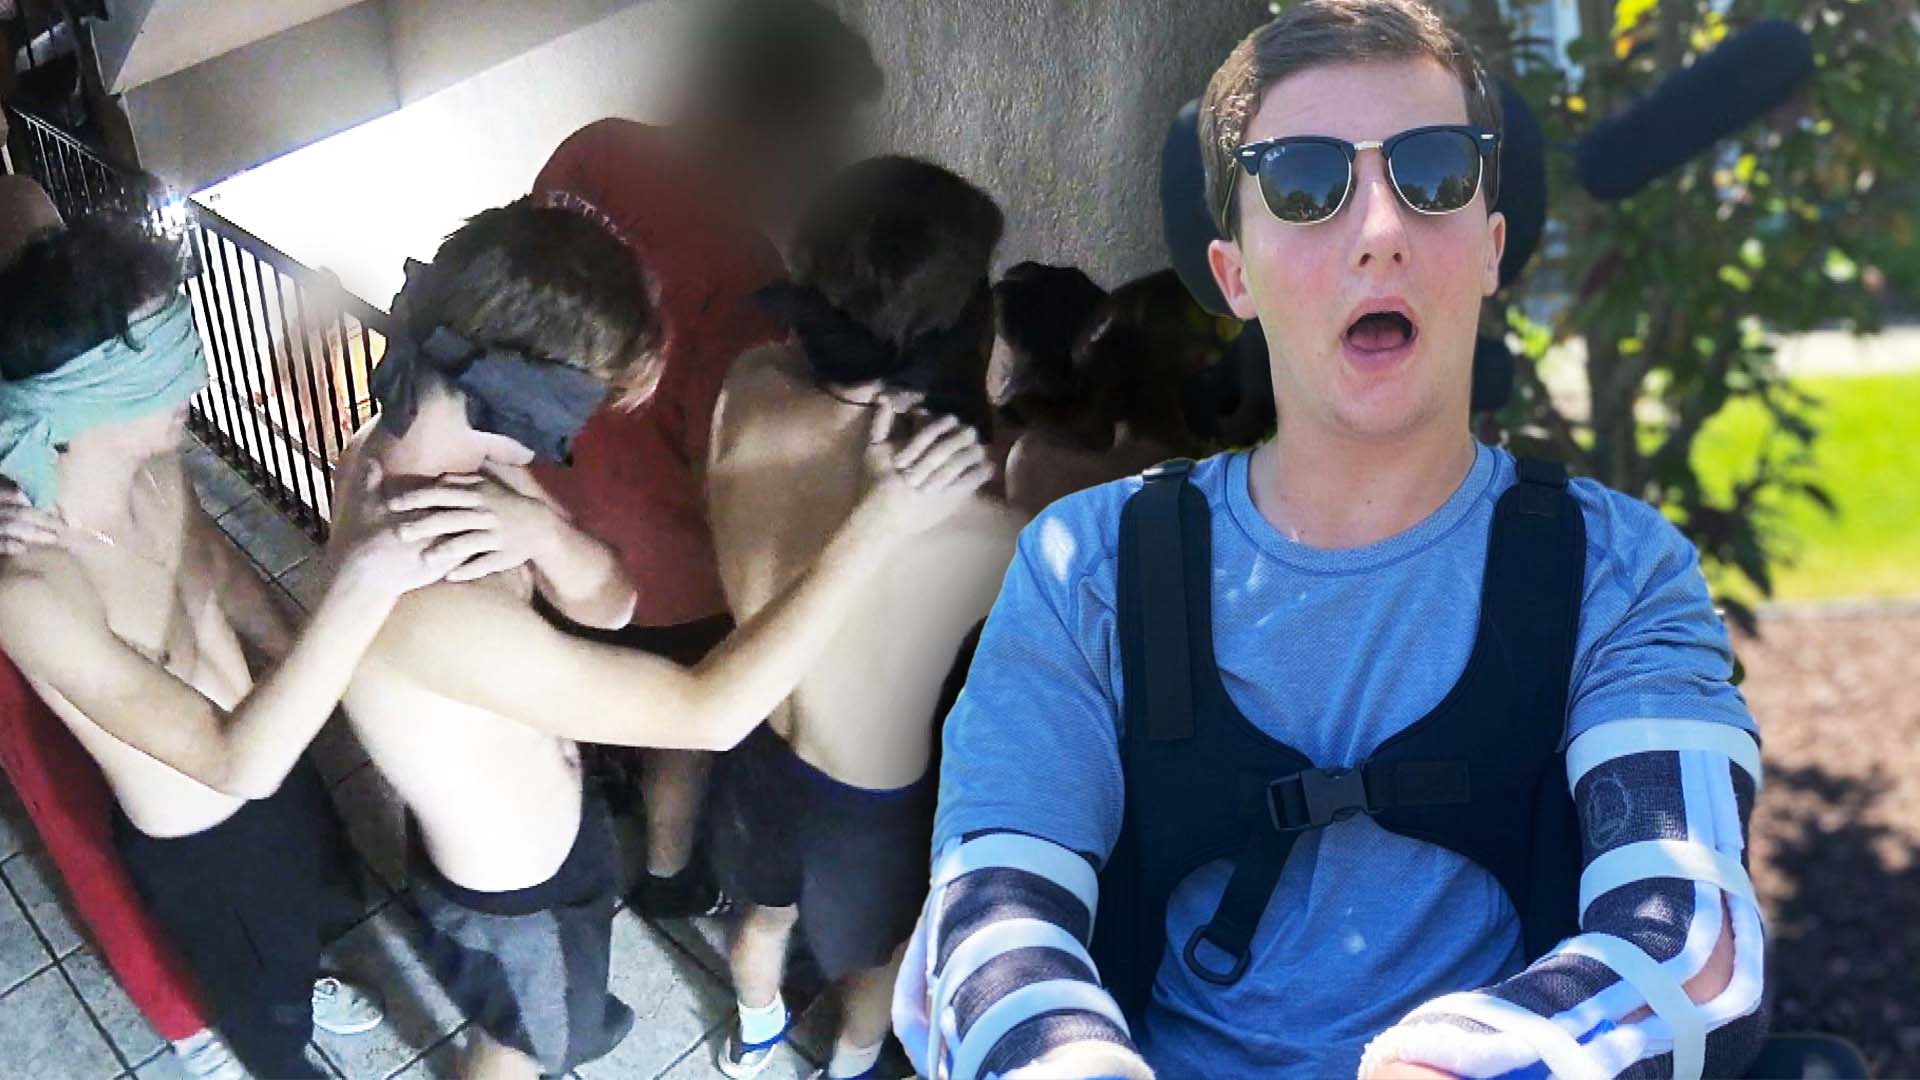 Video Shows Alleged Hazing at Fraternity That Left Freshman Paralyzed Inside Edition photo